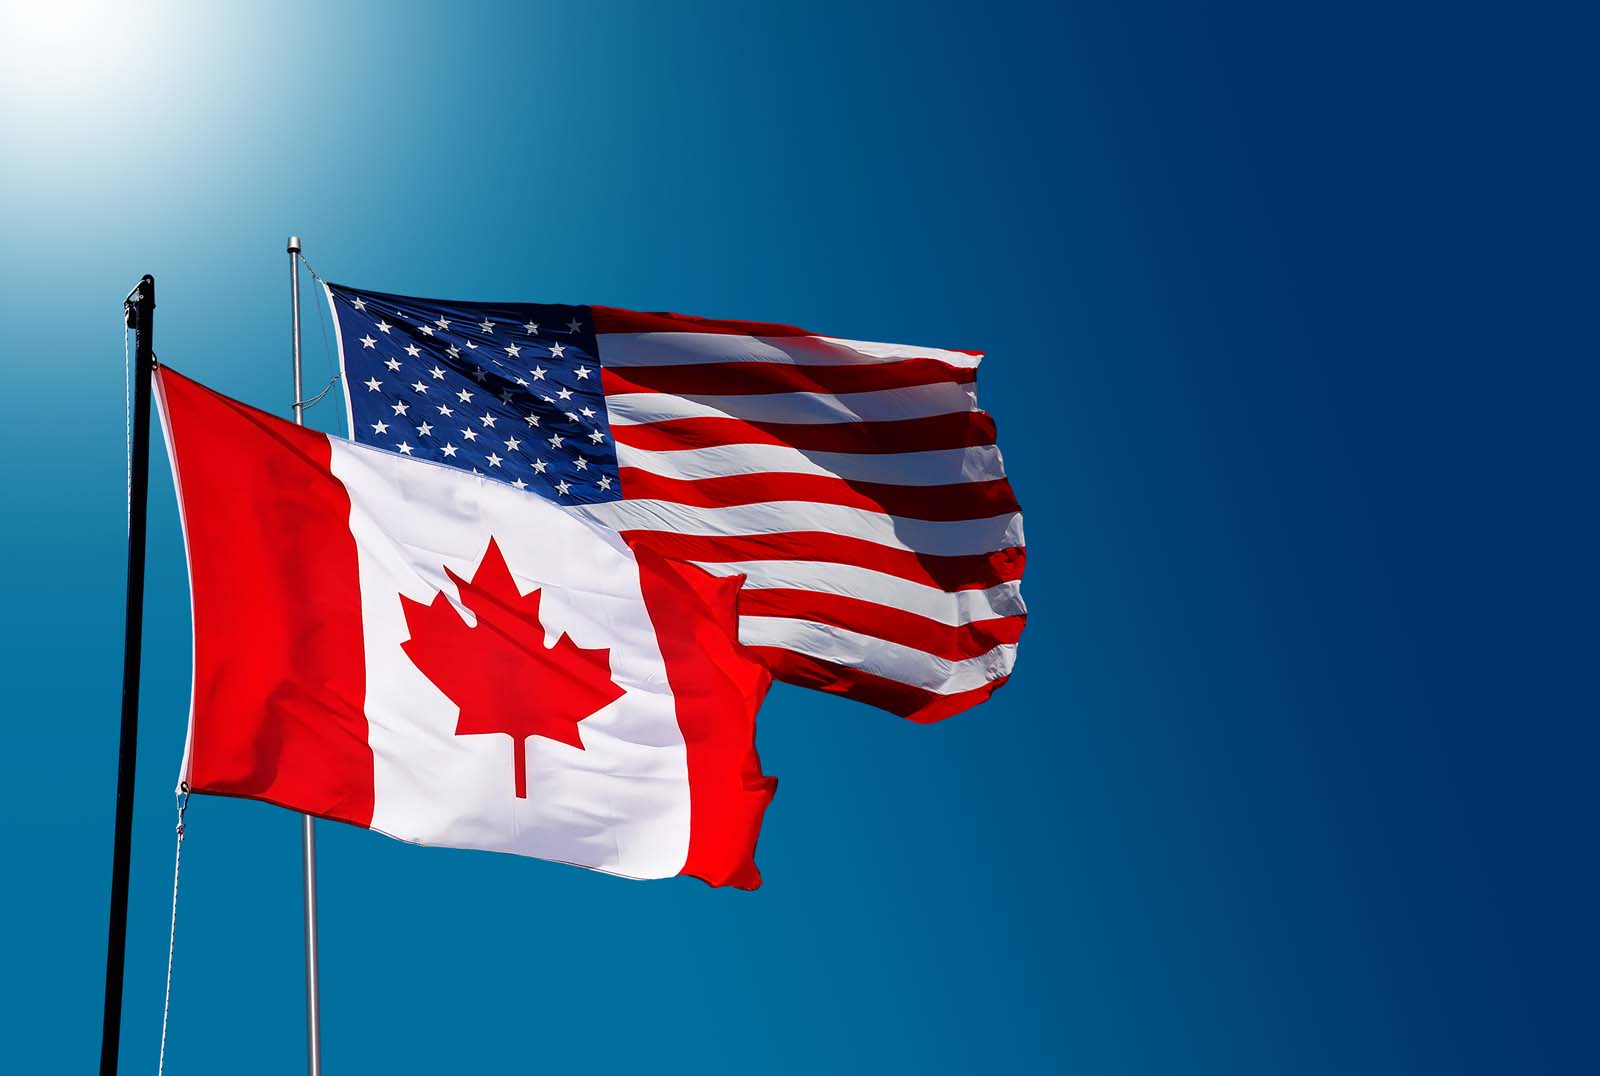 Canadian flag and American flag over a blue sky